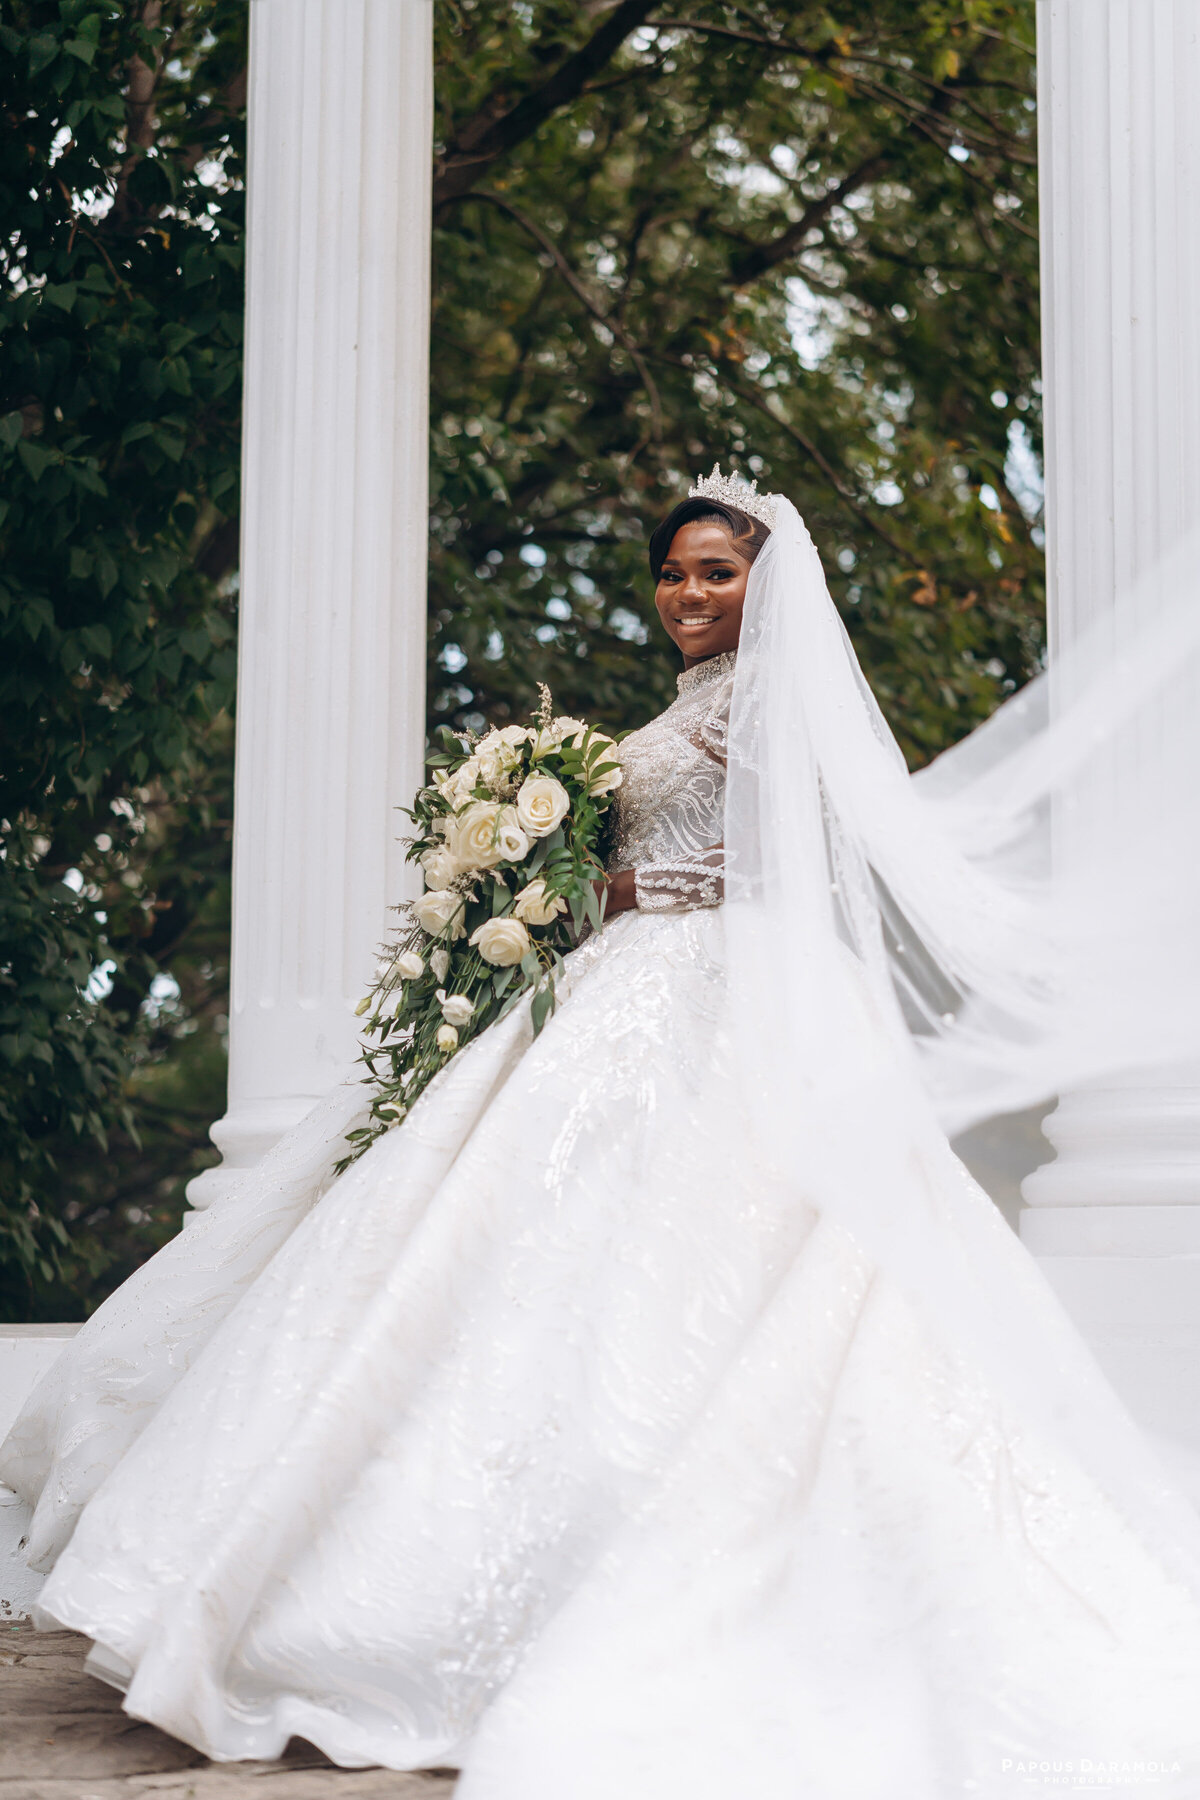 Abigail and Abije Oruka Events Papouse photographer Wedding event planners Toronto planner African Nigerian Eyitayo Dada Dara Ayoola outdoor ceremony floral princess ballgown rolls royce groom suit potraits  paradise banquet hall vaughn 192